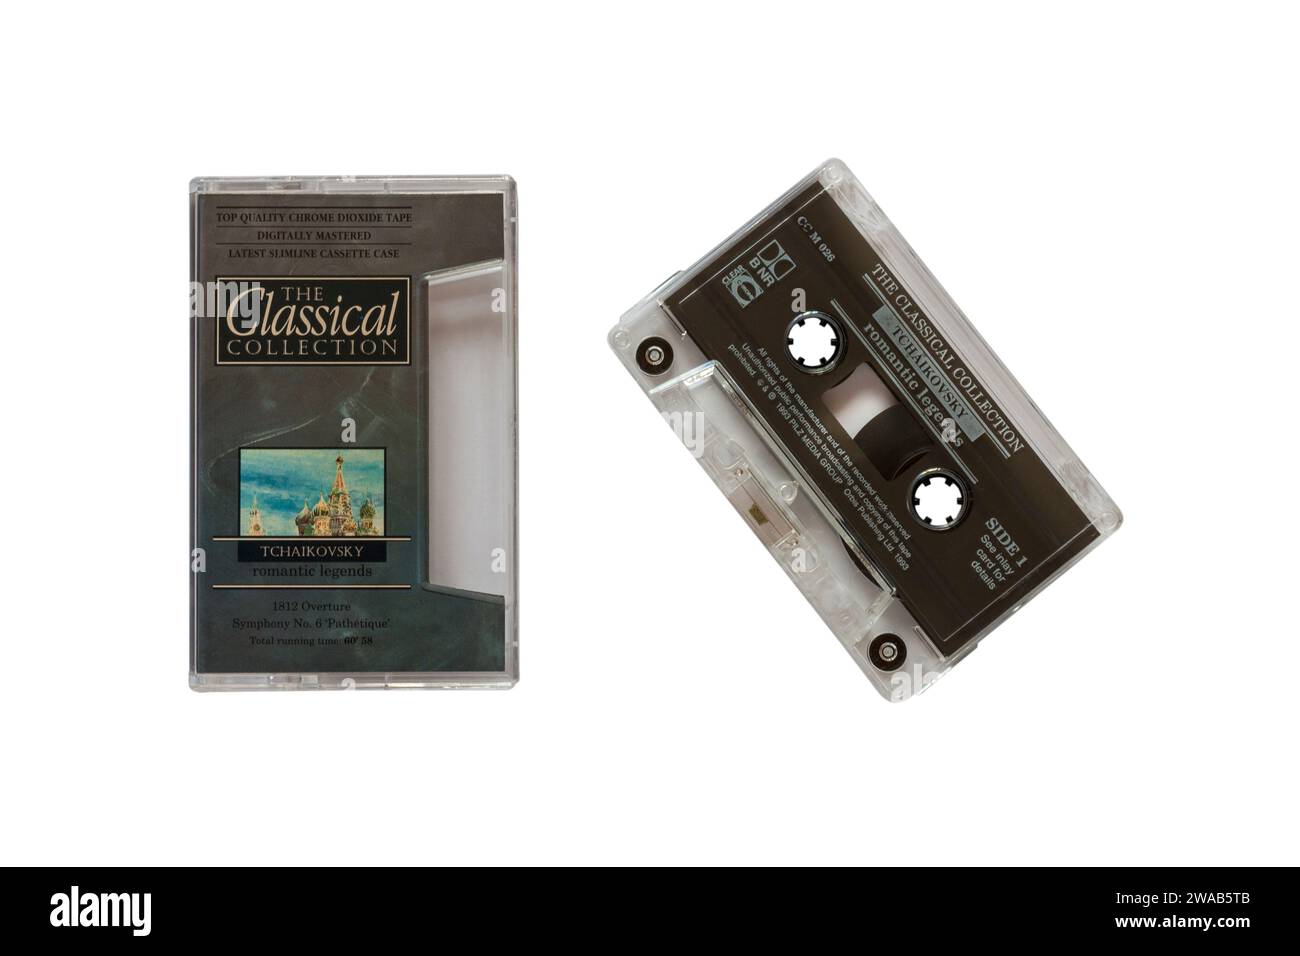 The Classical Collection Tchaikovsky Romantic Legends cassette tape removed from case isolated on white background - classical music Stock Photo